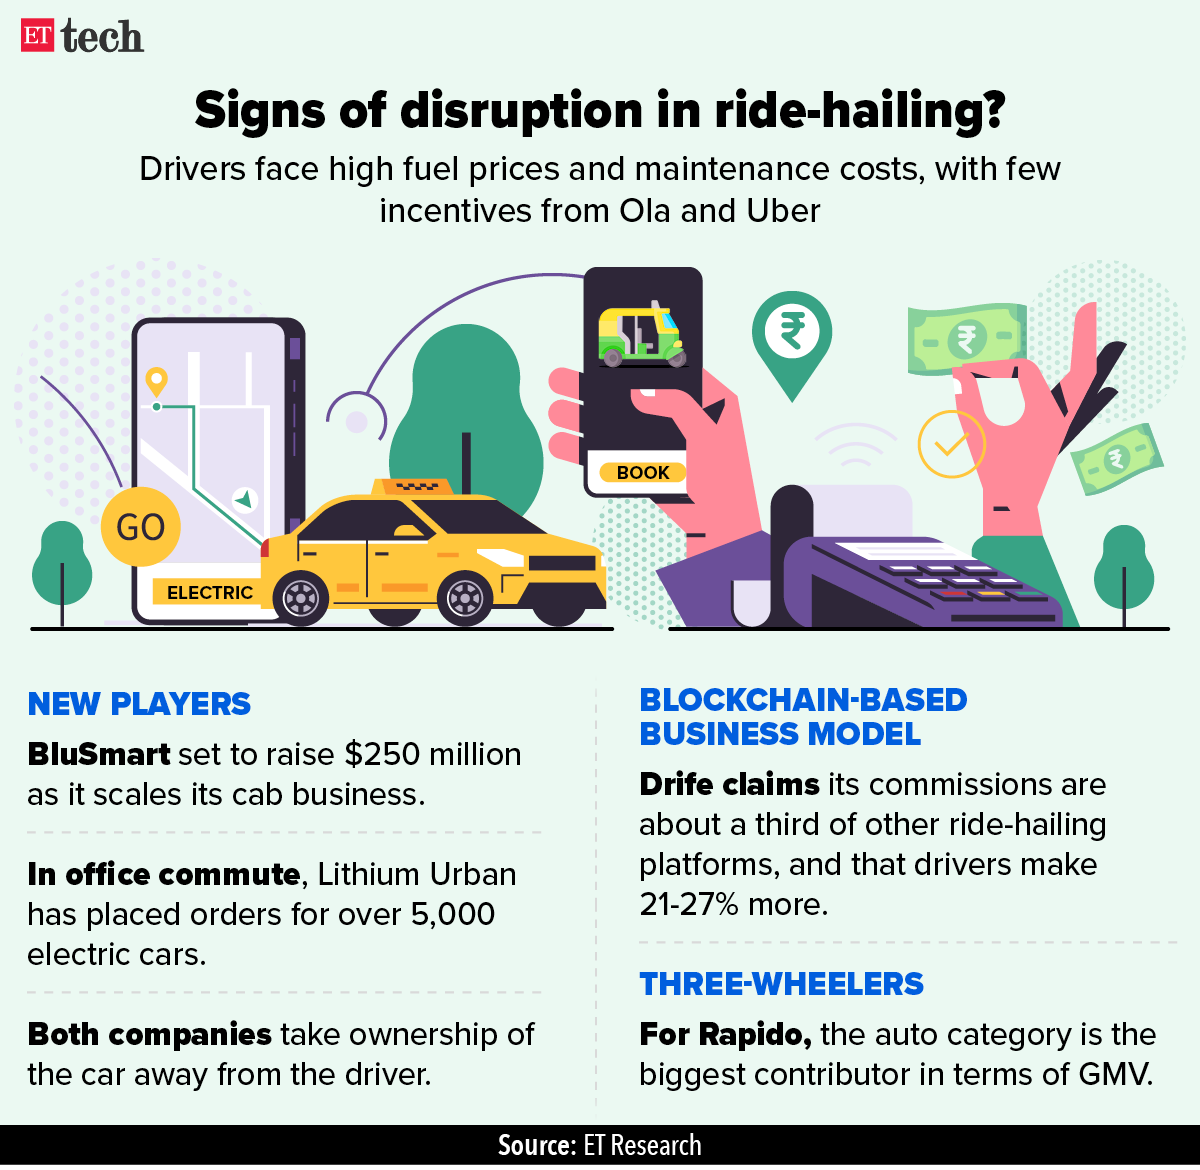 Signs of disruption in ride-hailing